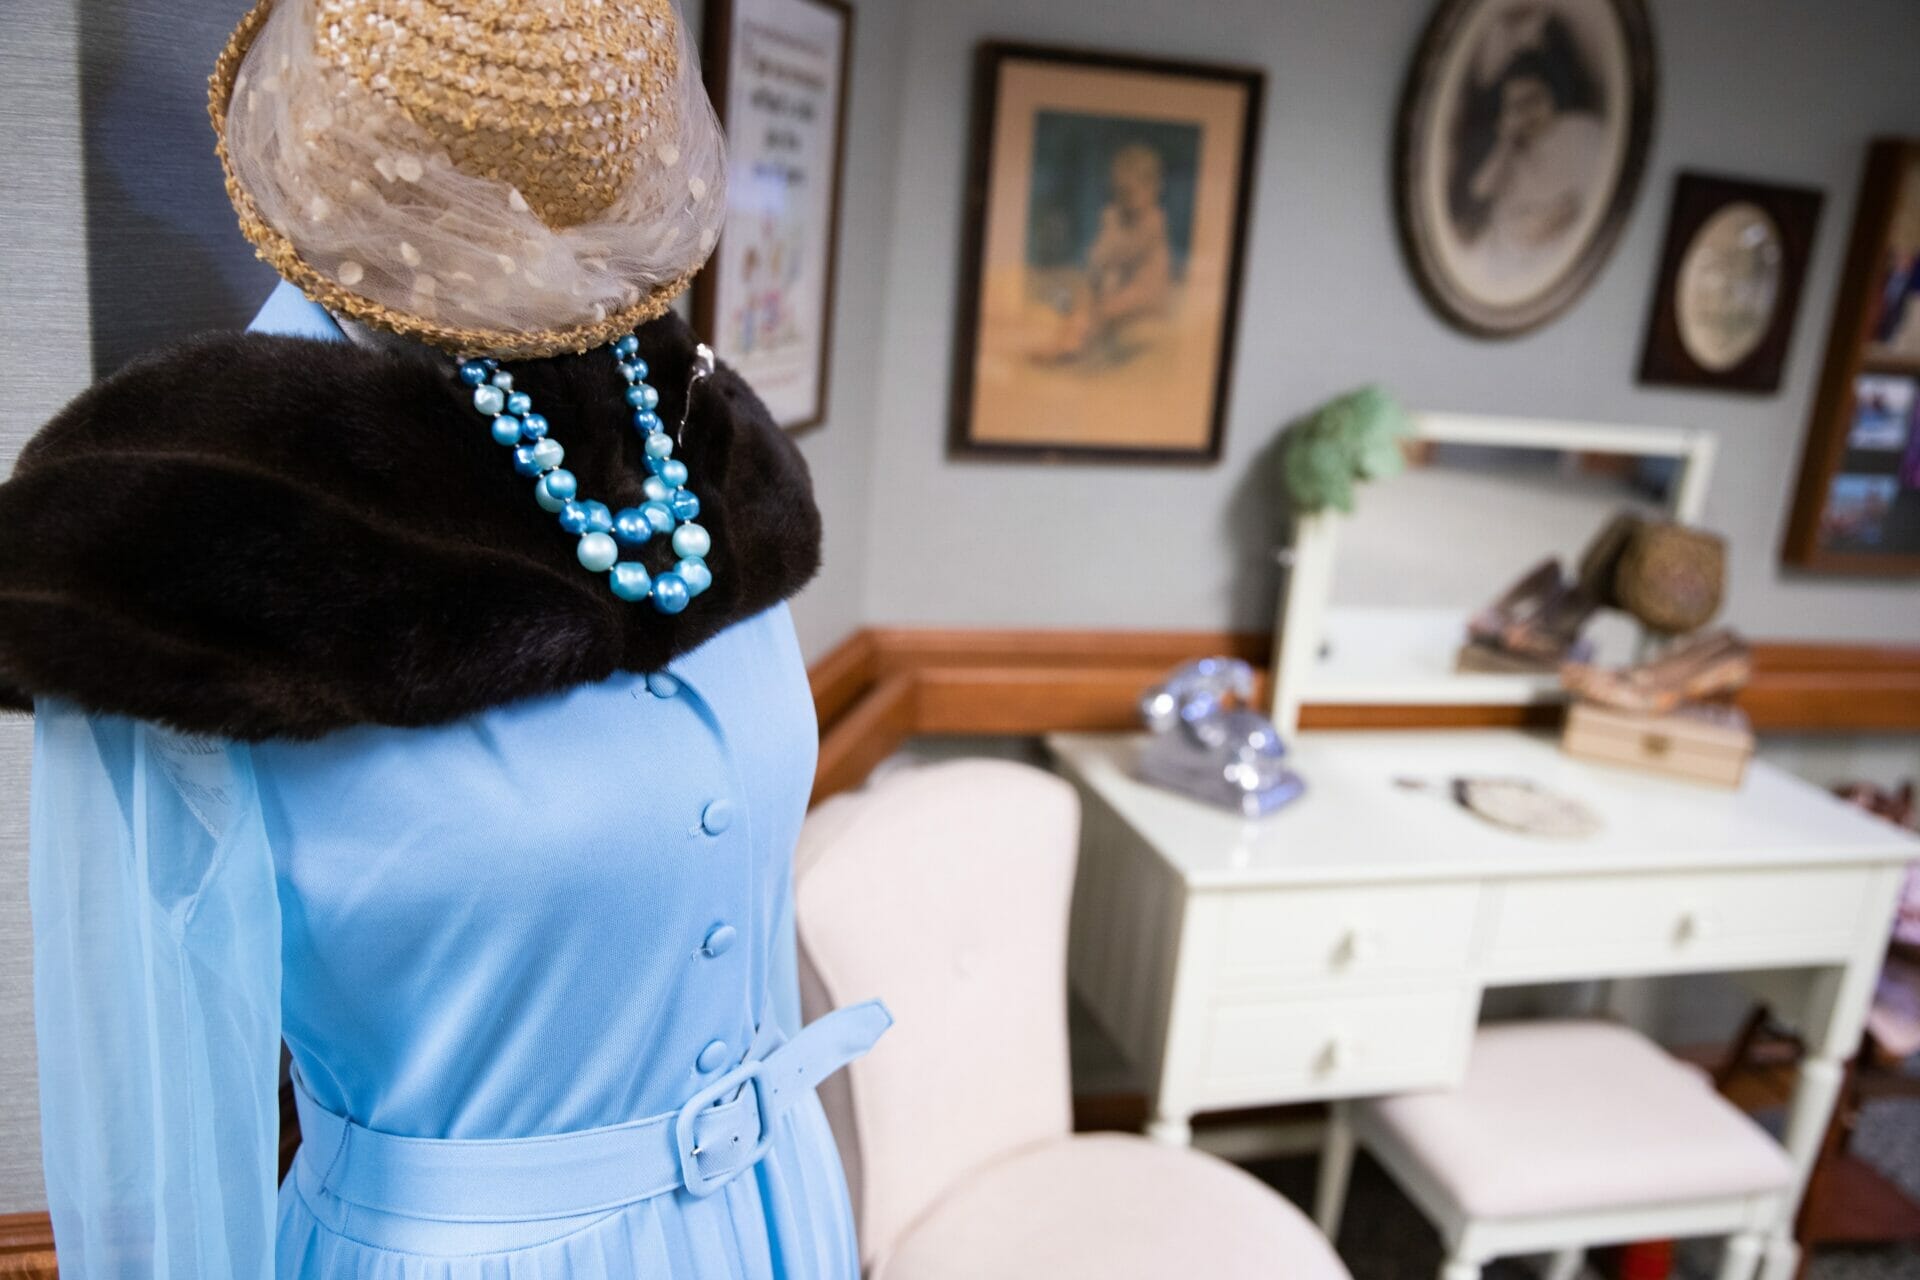 <span  class="uc_style_uc_tiles_grid_image_elementor_uc_items_attribute_title" style="color:#000000;">A blue dress on a mannequin in a vintage-style room with black and white pictures and an antique white vanity.</span>